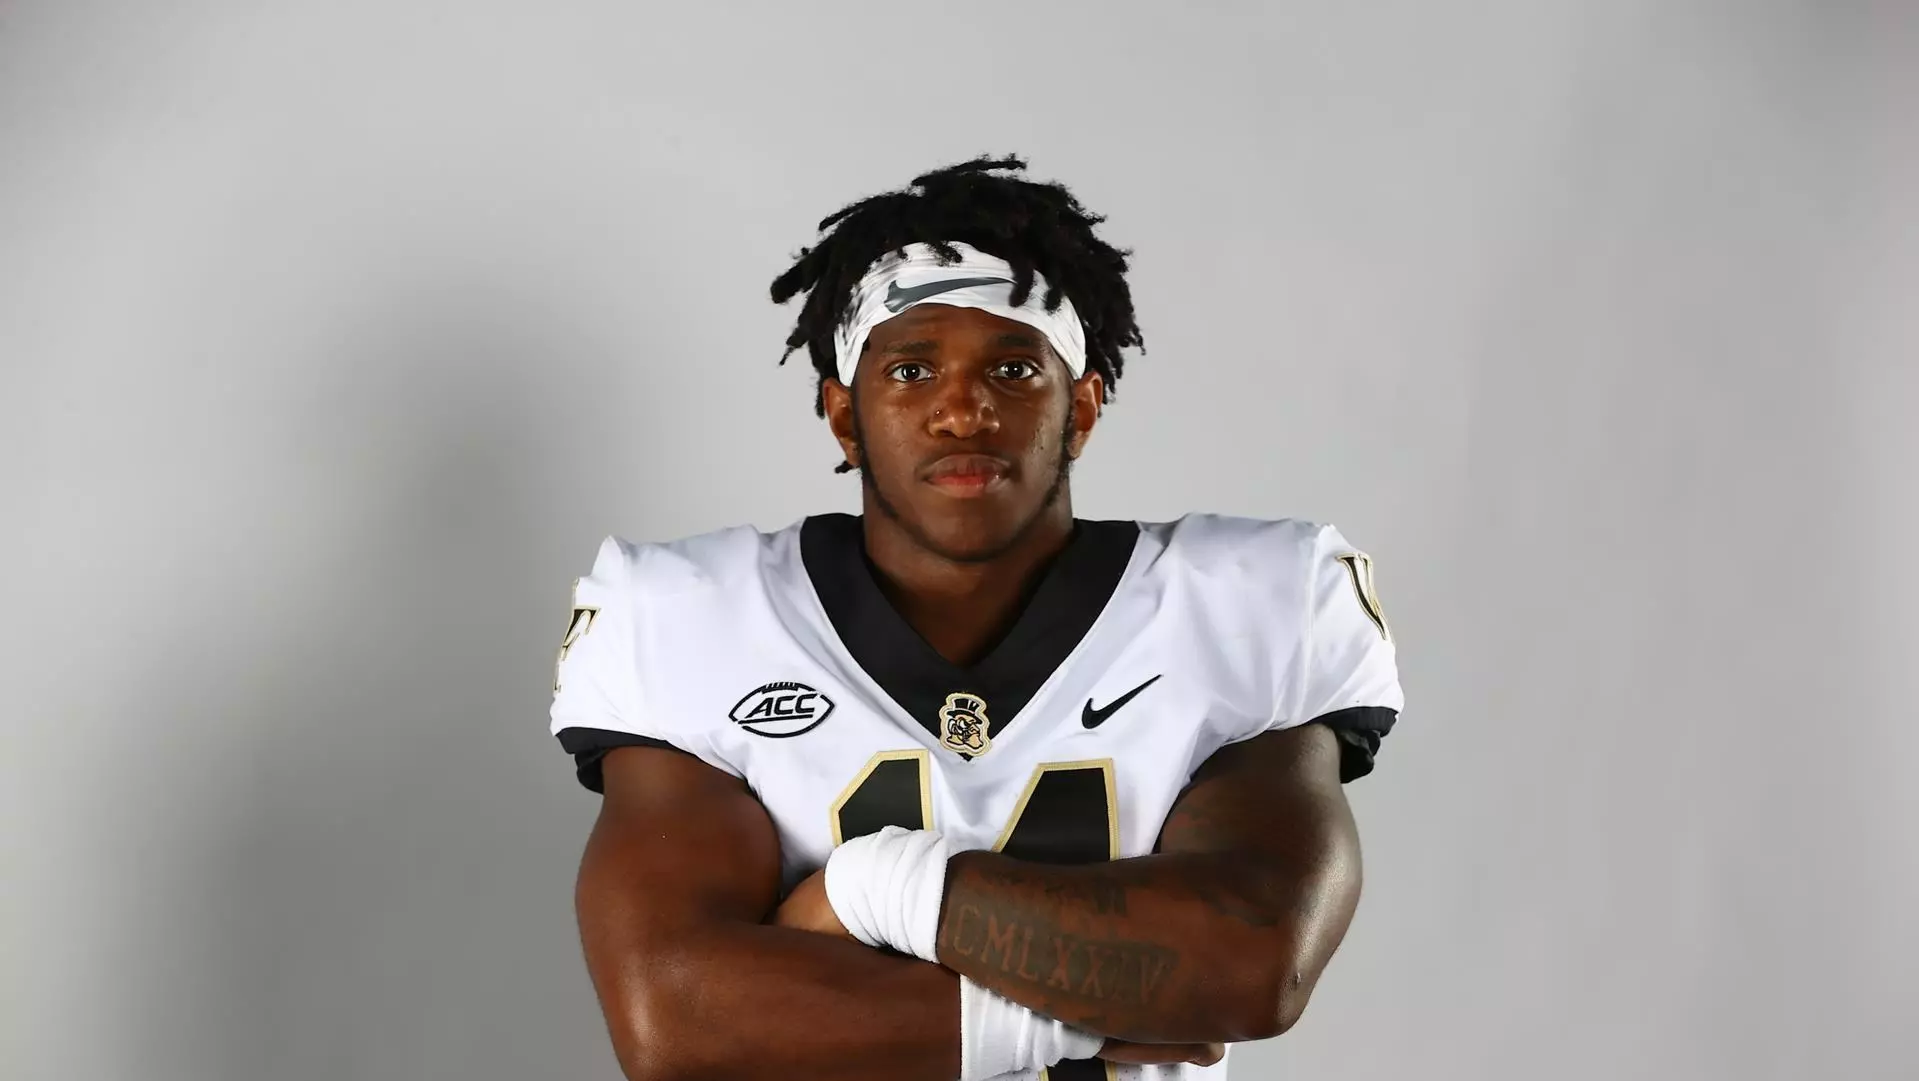 Justice Ellison is a quick RB at Wake Forest with good vision. Hula Bowl scout Ian McNice breaks down Ellison as an NFL Prospect in his report.